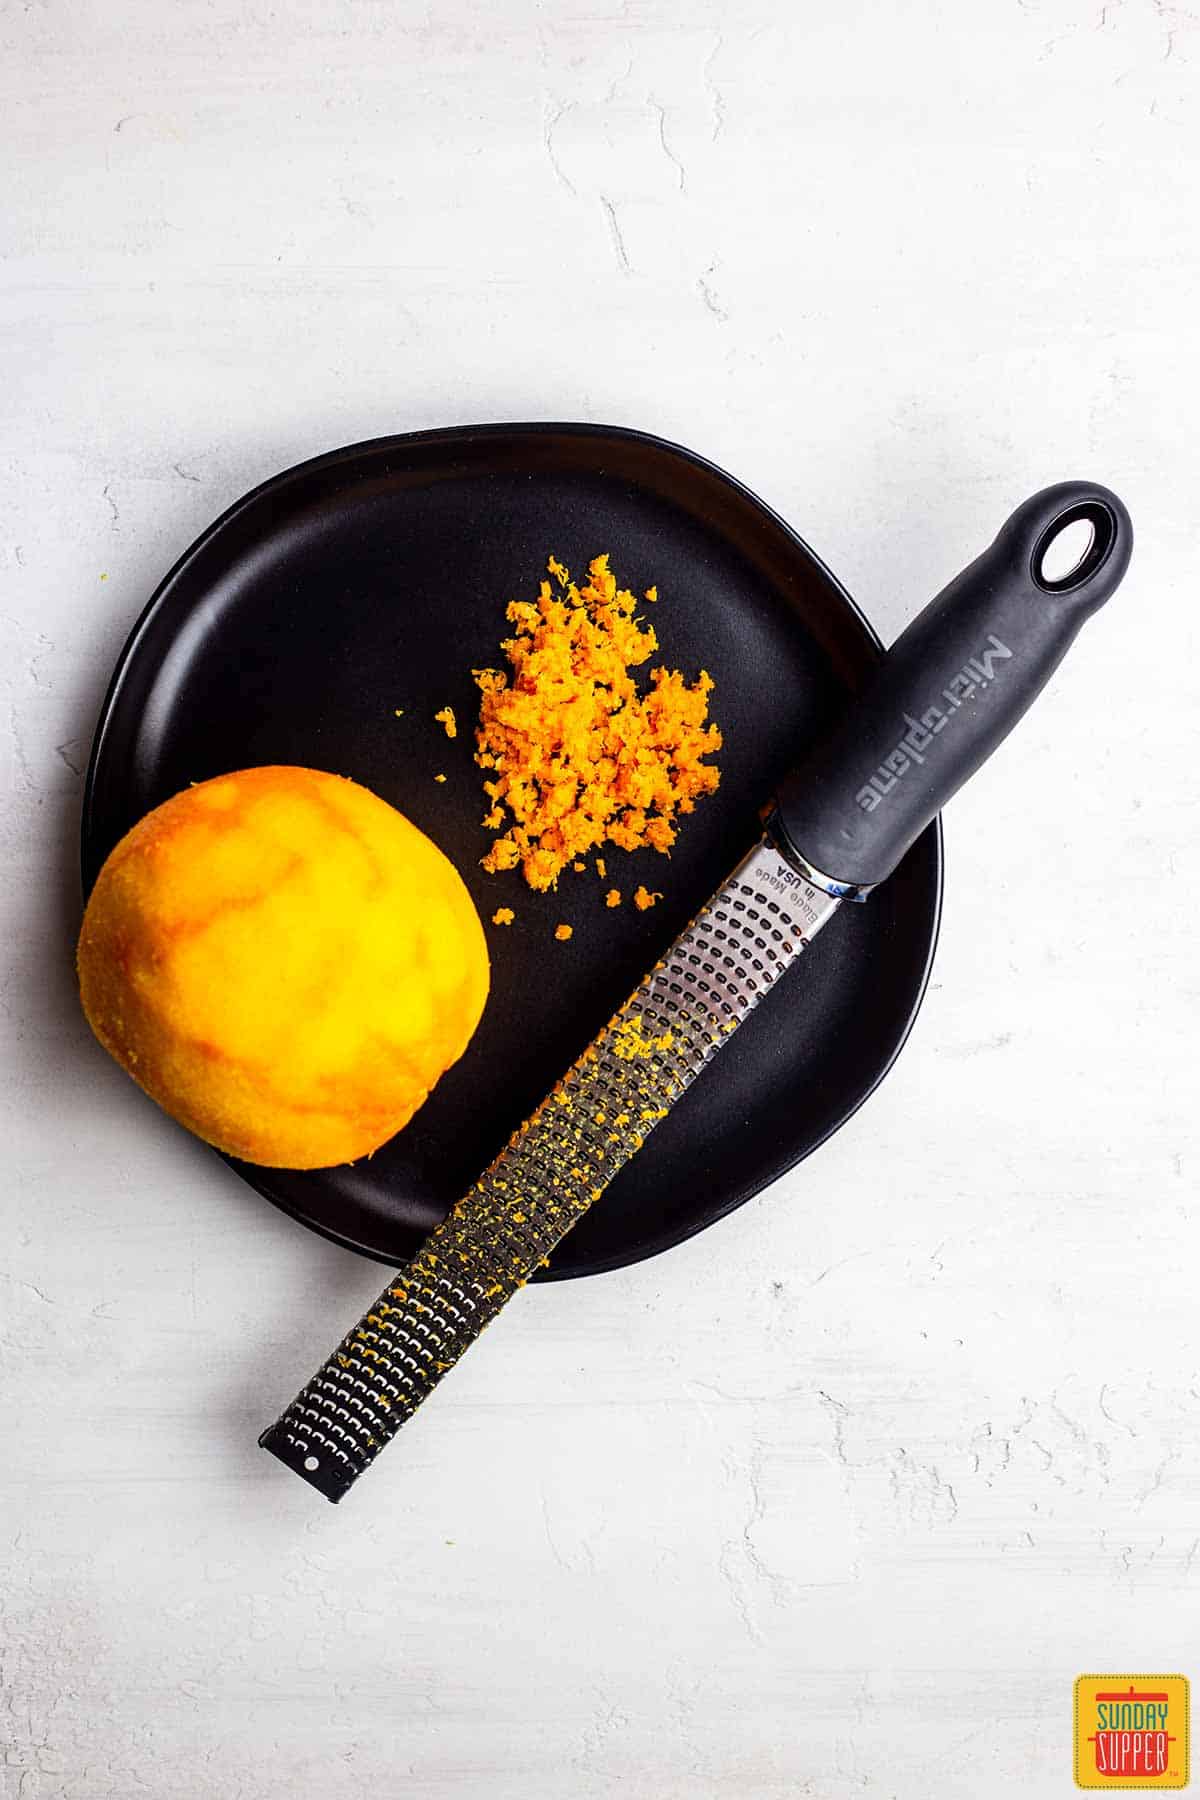 Zest of an orange and an orange on a black plate with a grater